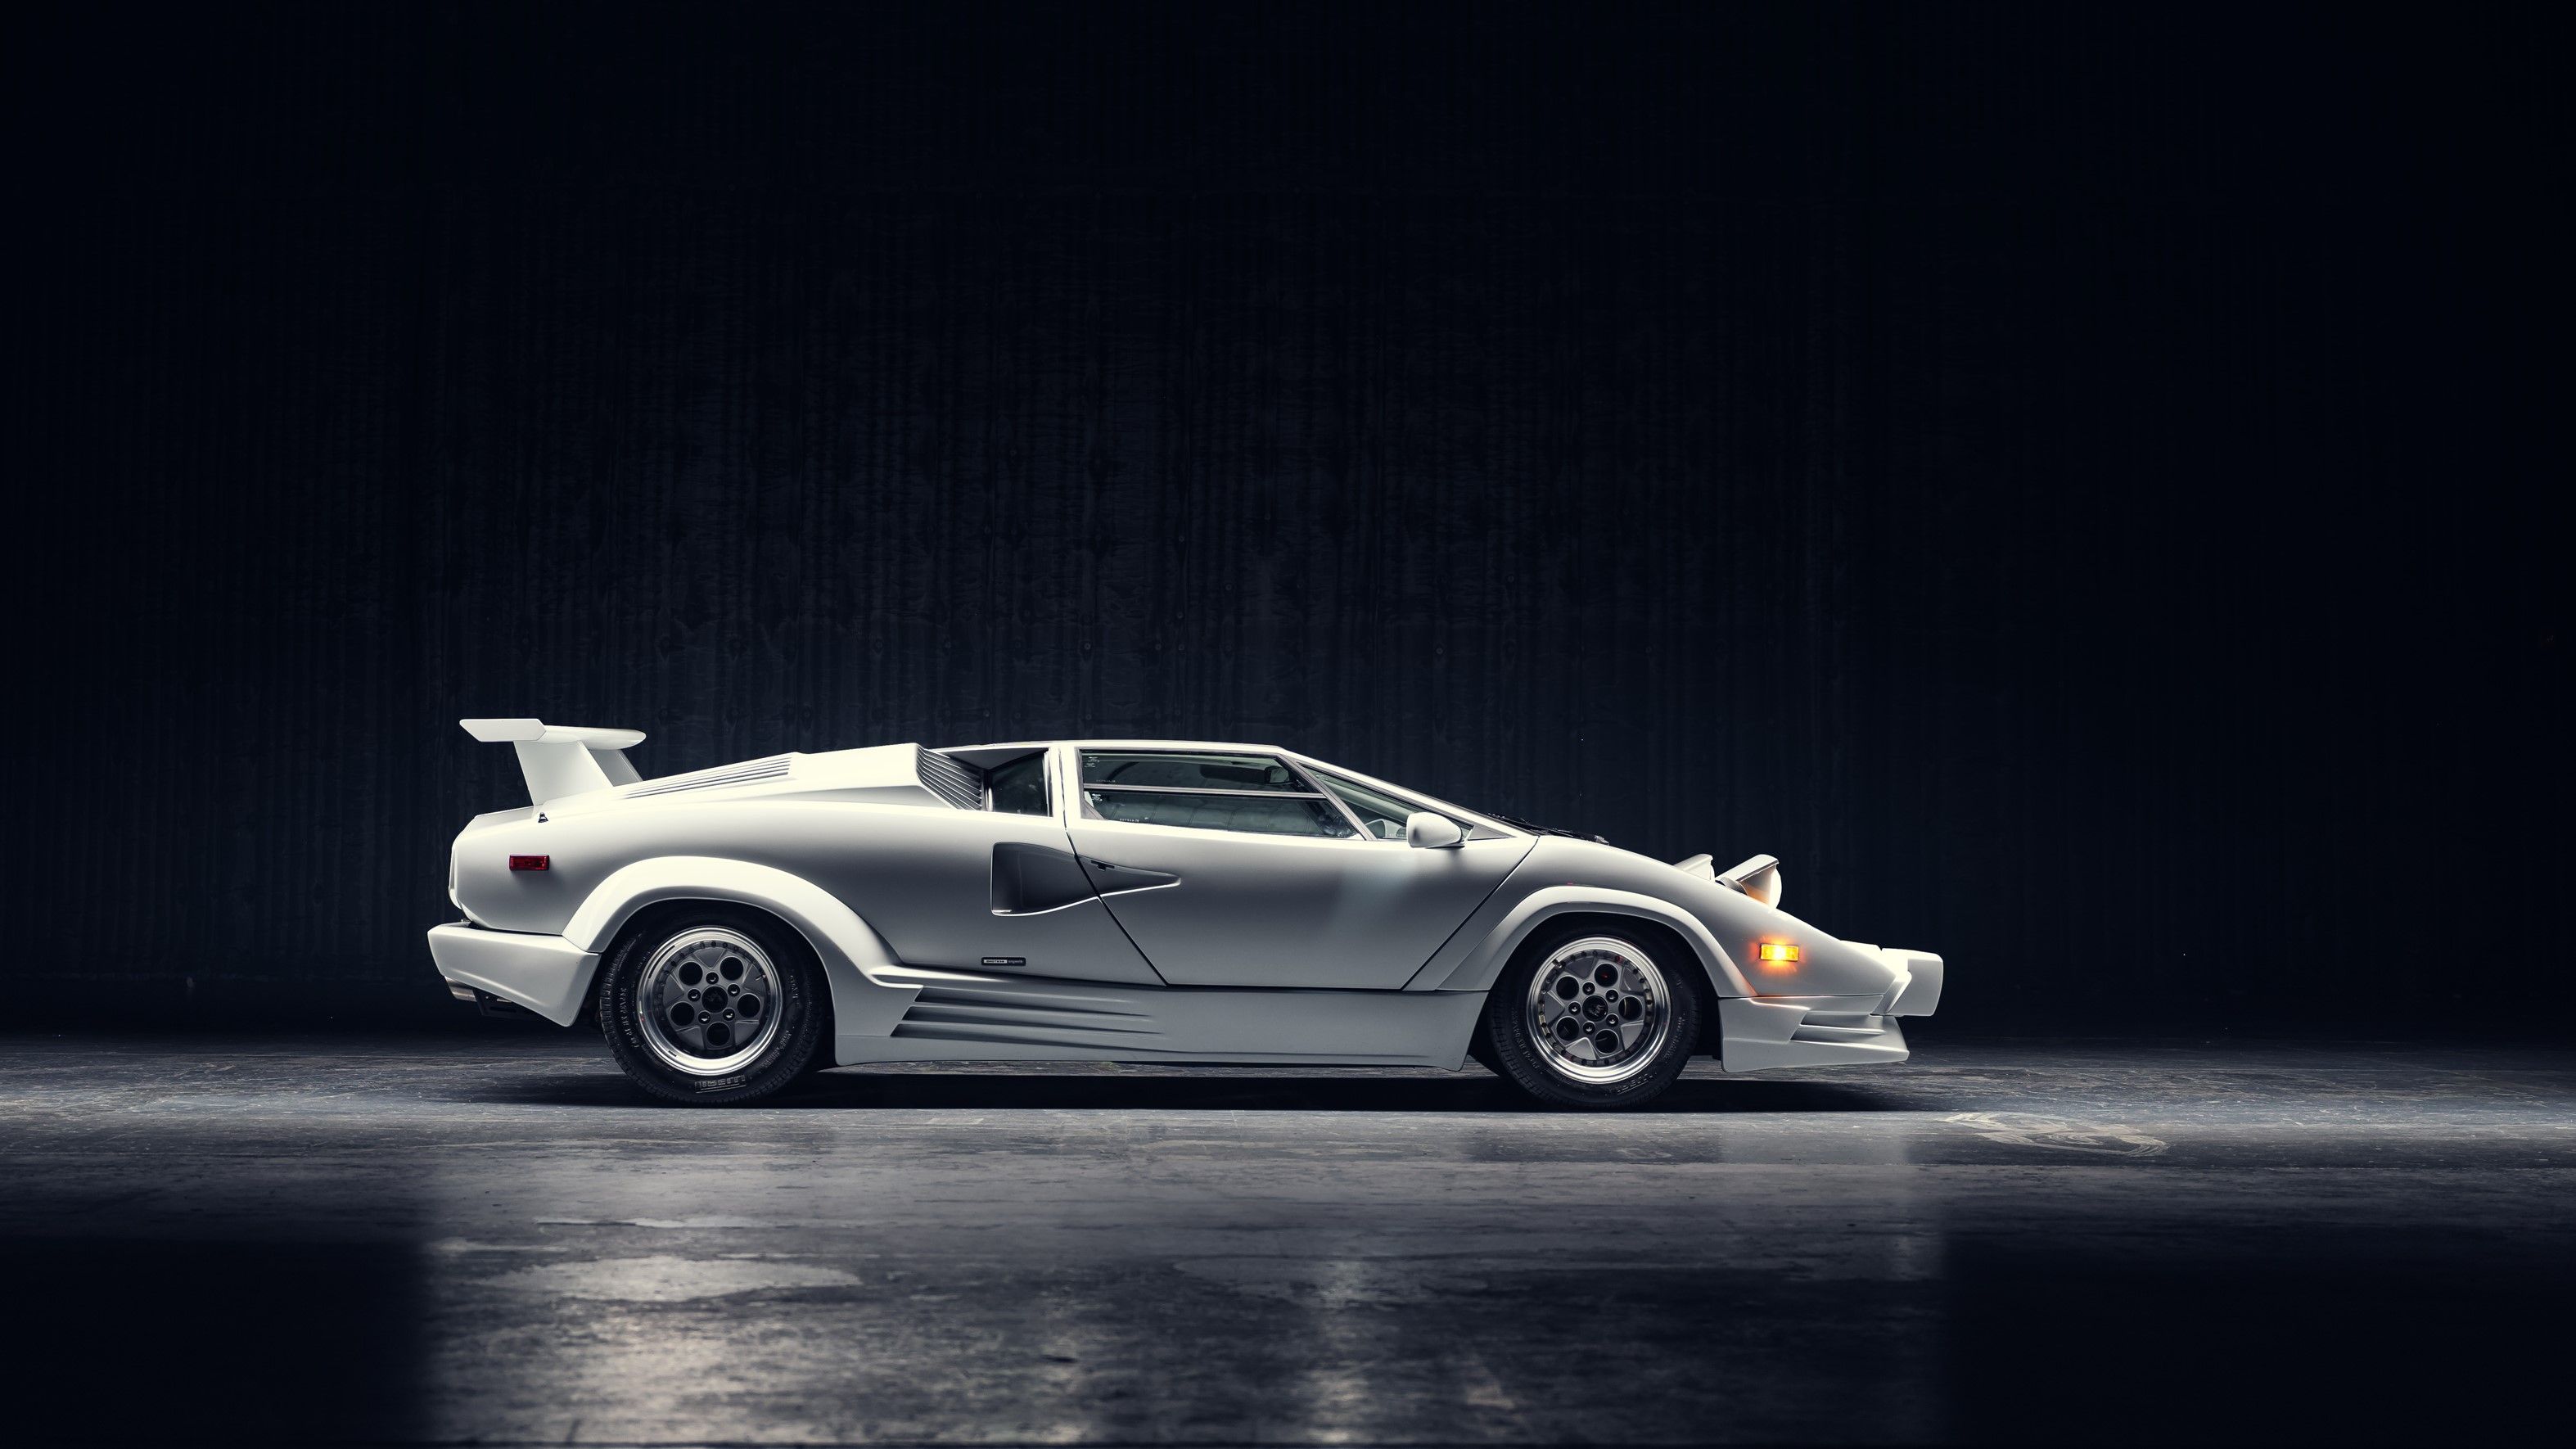 General 3147x1770 Lamborghini Countach Countach 25th Anniversary white cars photography car side view simple background vehicle italian cars Volkswagen Group